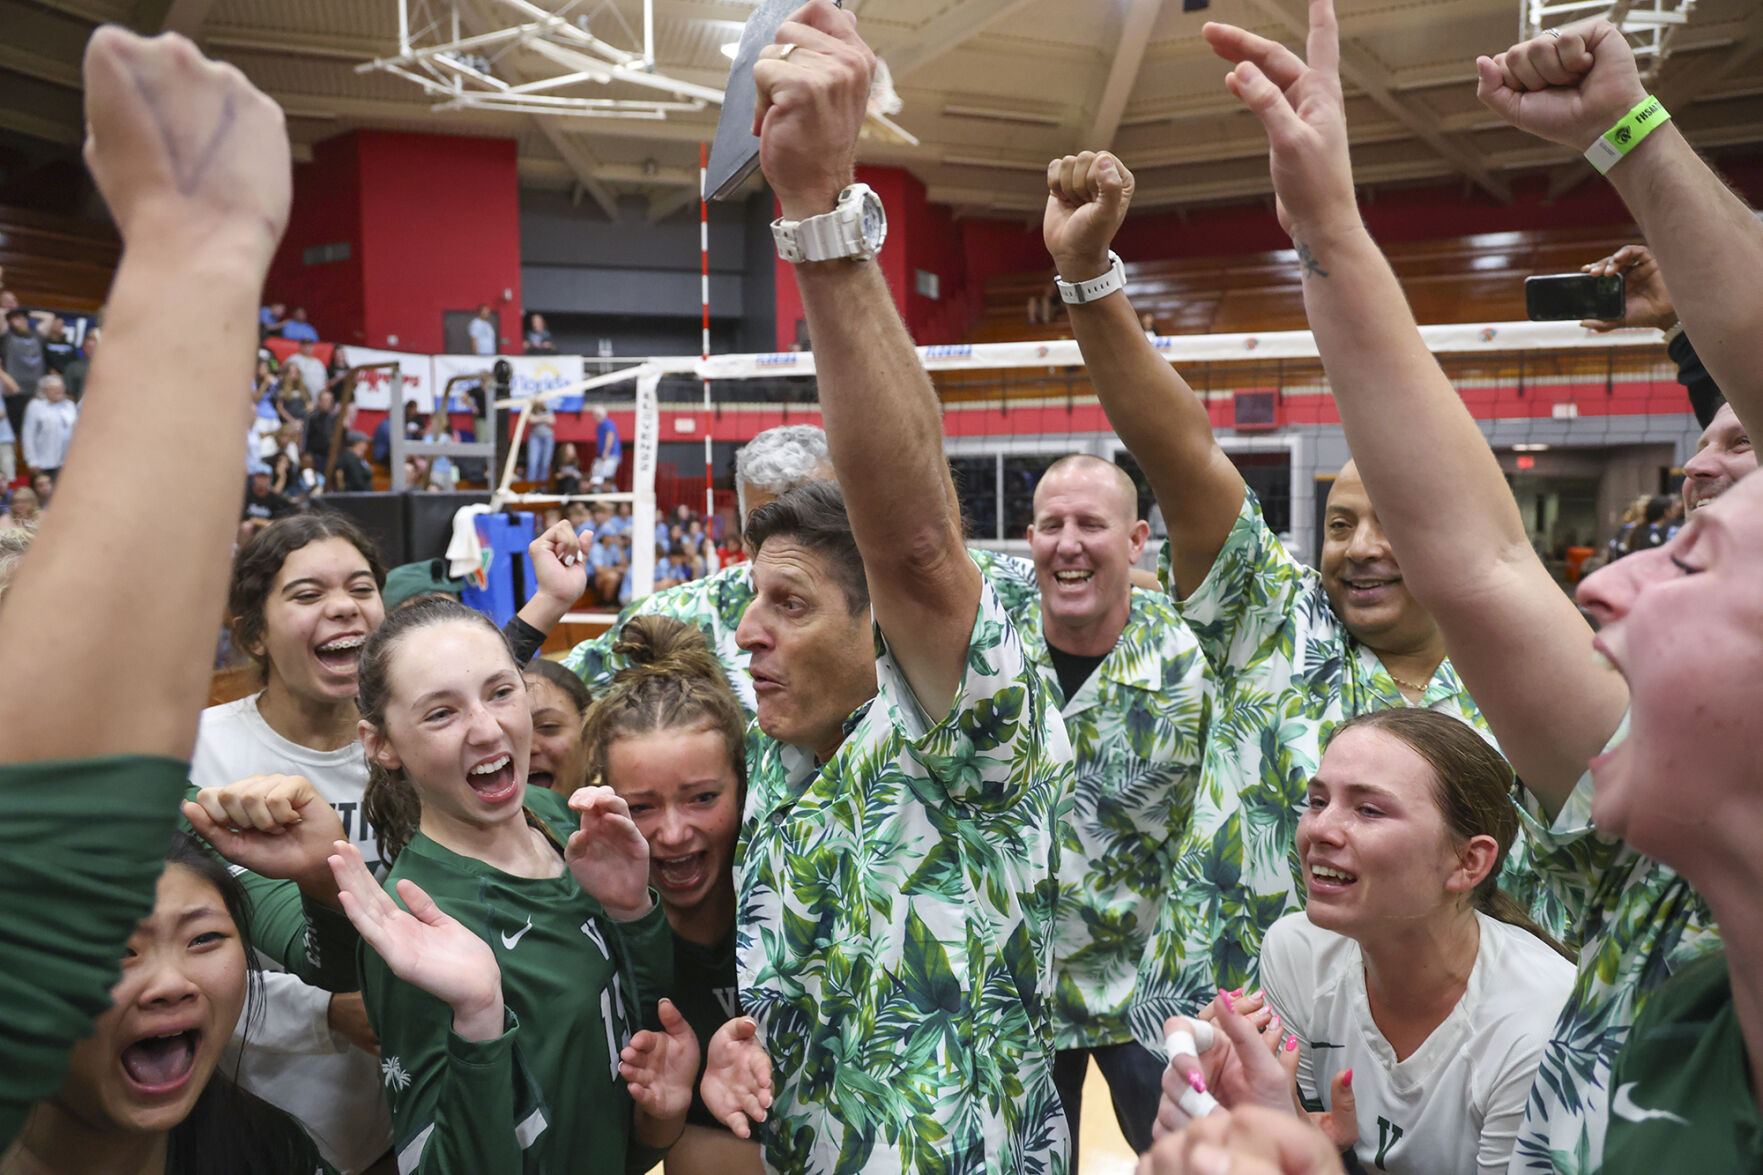 PREP VOLLEYBALL: Wheatley moves on after 30 seasons as Venice head coach